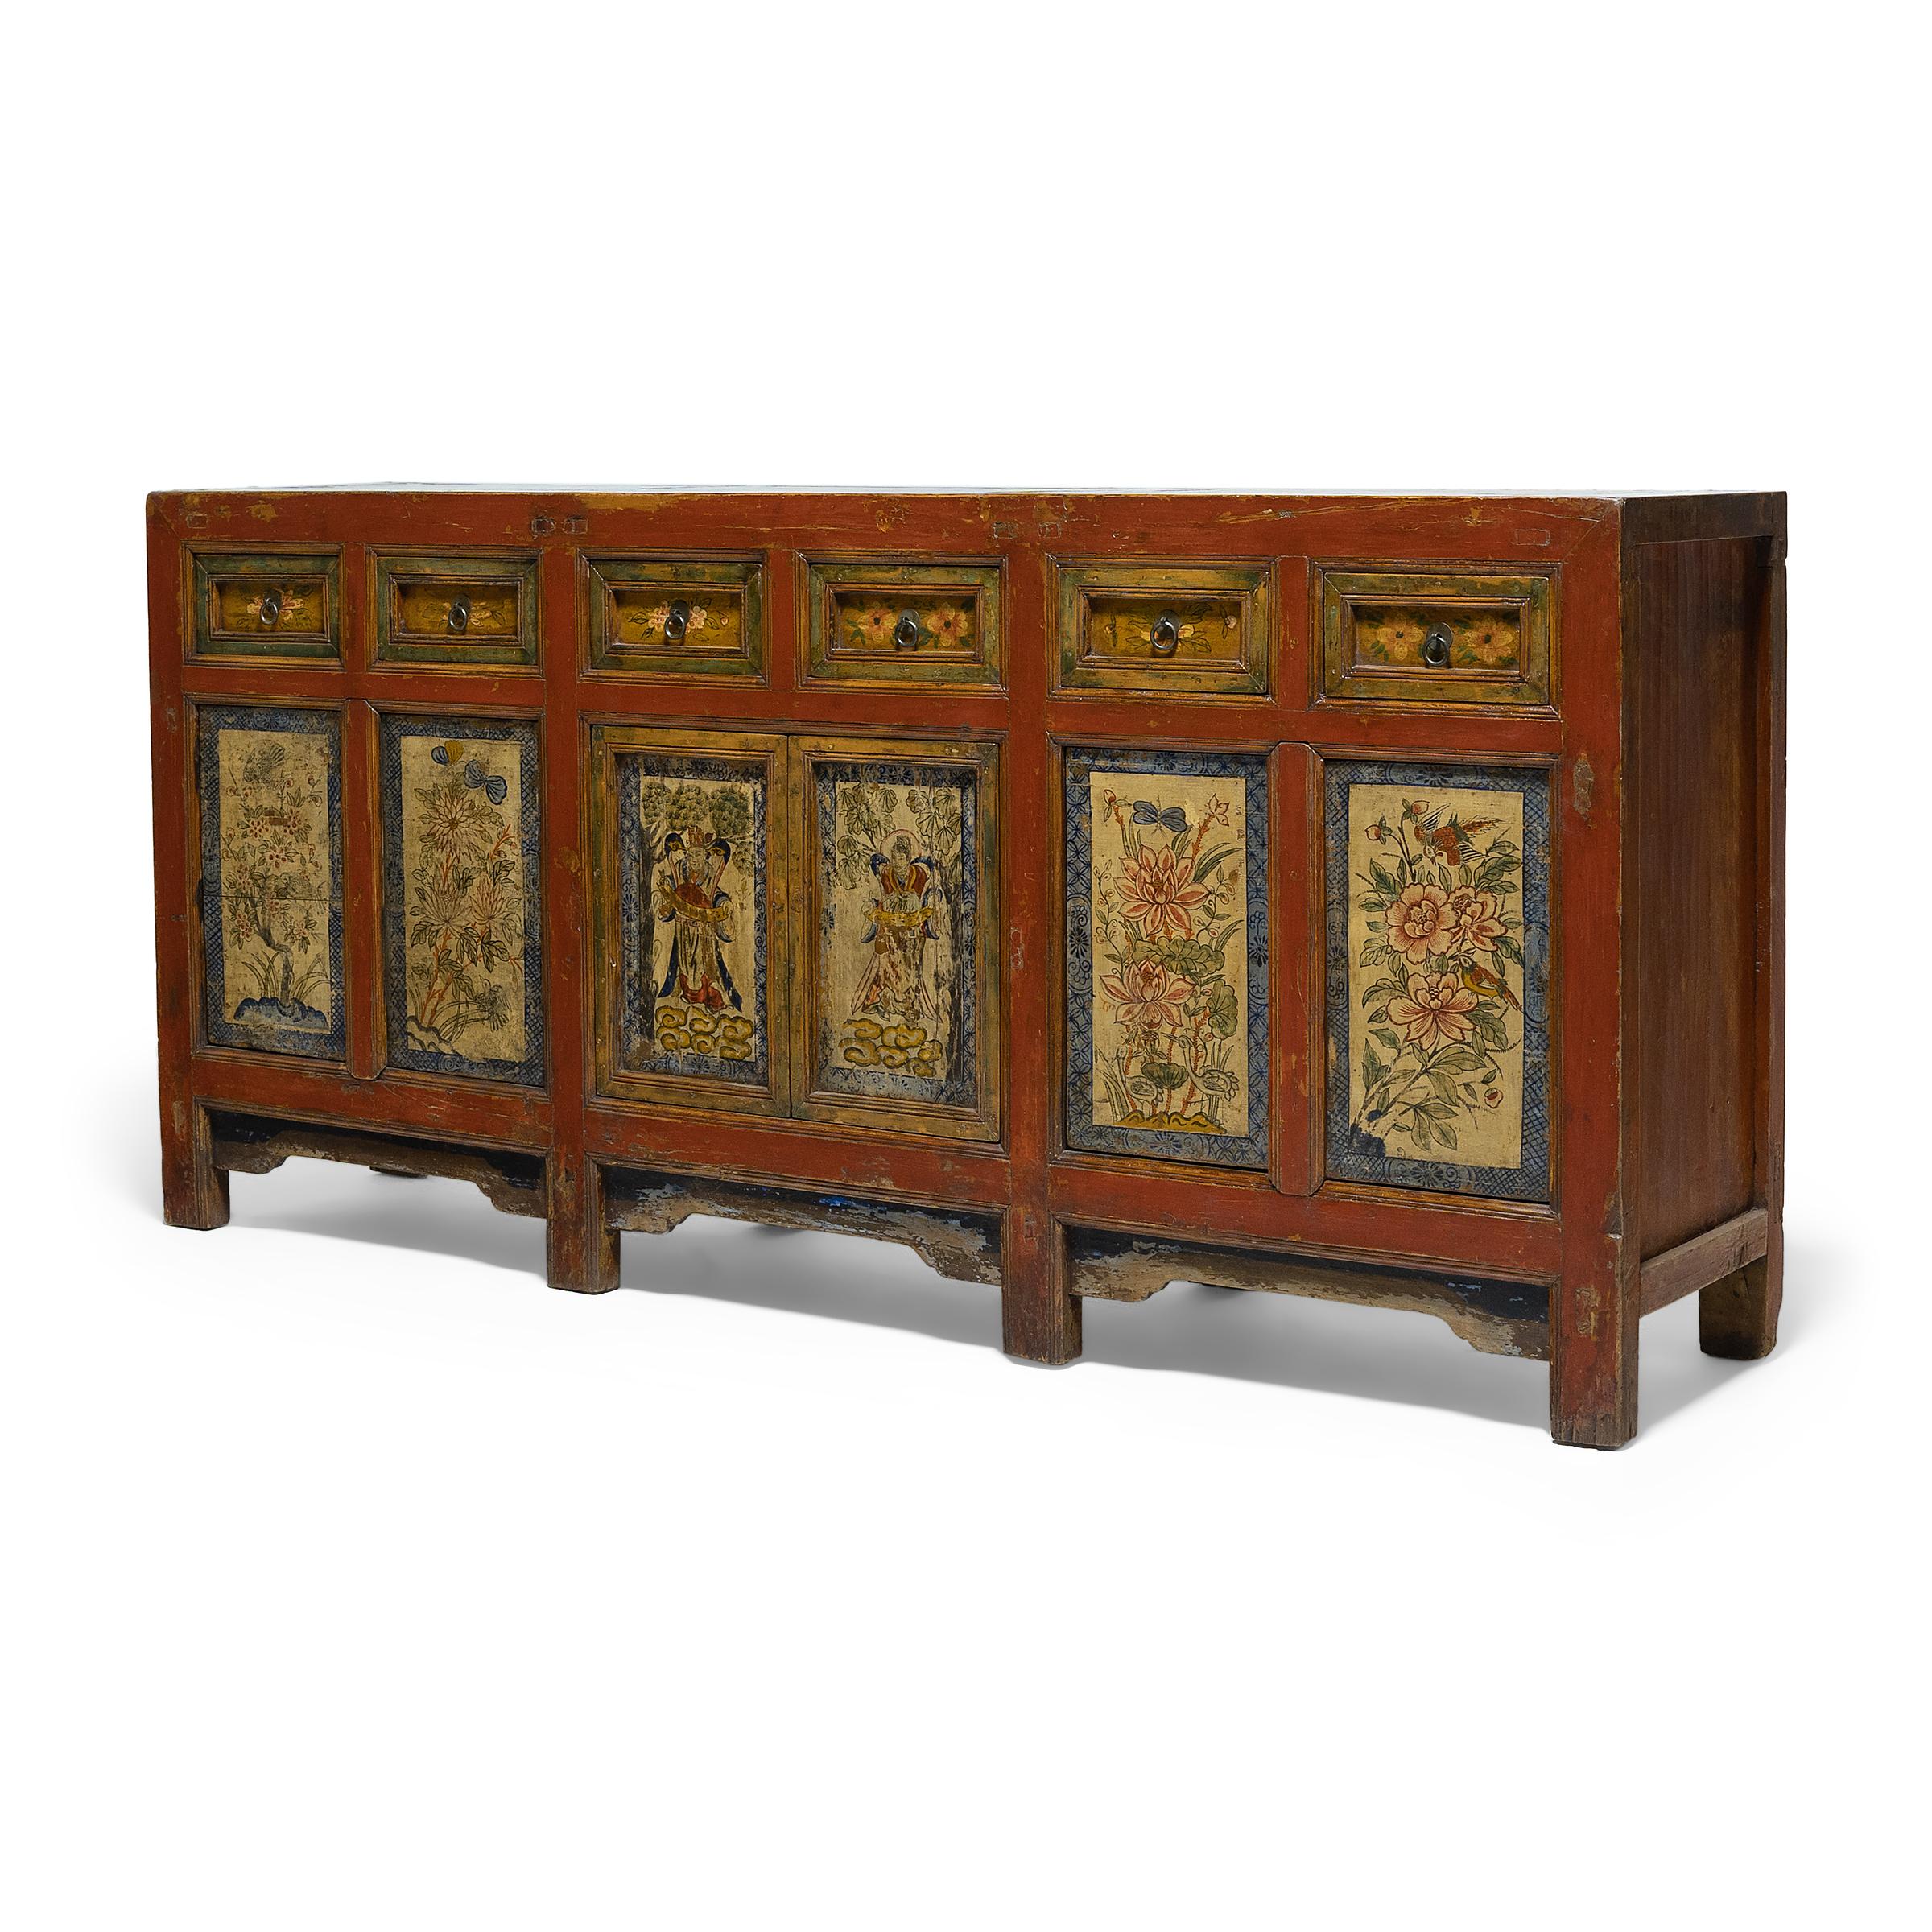 This provincial coffer from northern China has a simple, clean-lined form embellished with colorful lacquer and hand-painted decoration. The cabinet was crafted in the late 19th century with mortise-and-tenon joinery methods, without the use of